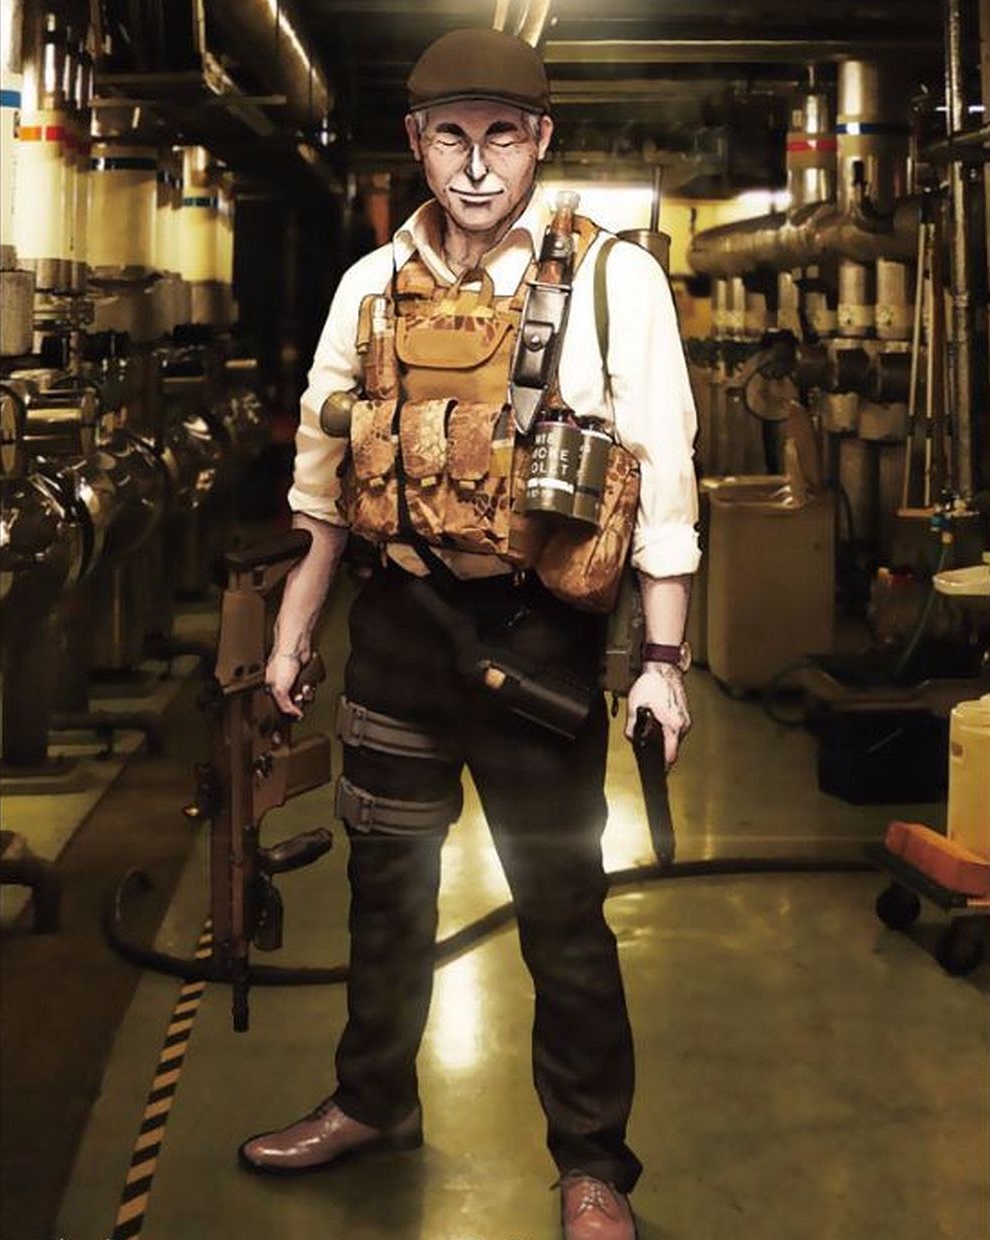 Pin by Coo on 亜人 | Anime character design, Character art, Ajin anime